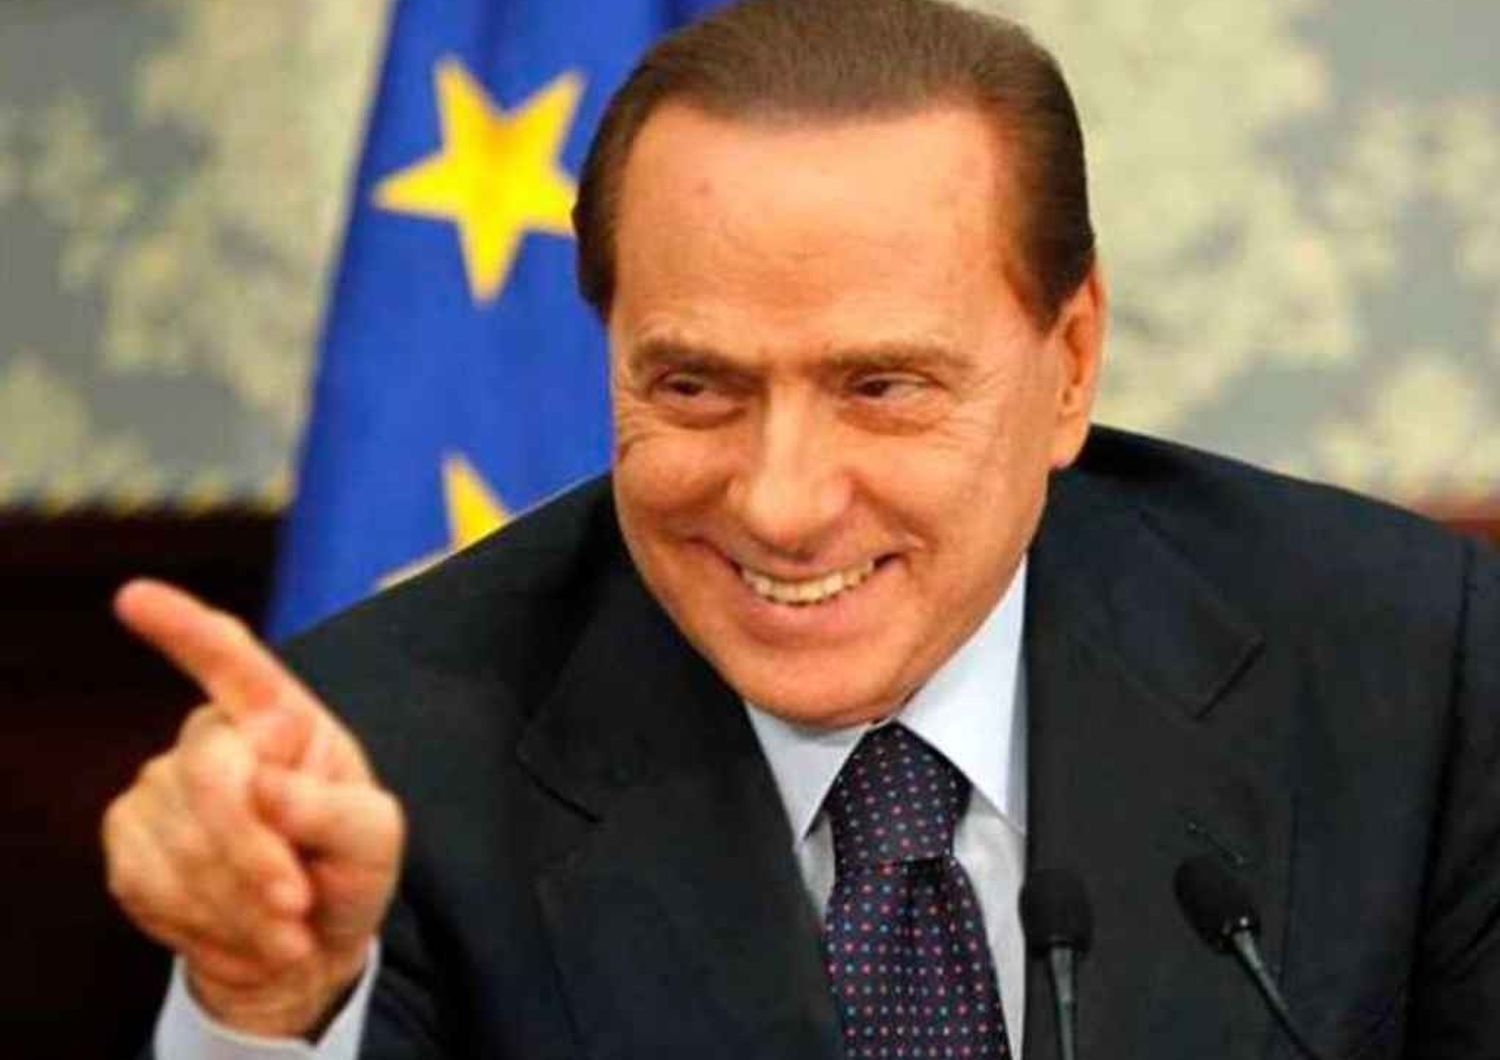 Berlusconi "moved" by Ruby trial acquittal